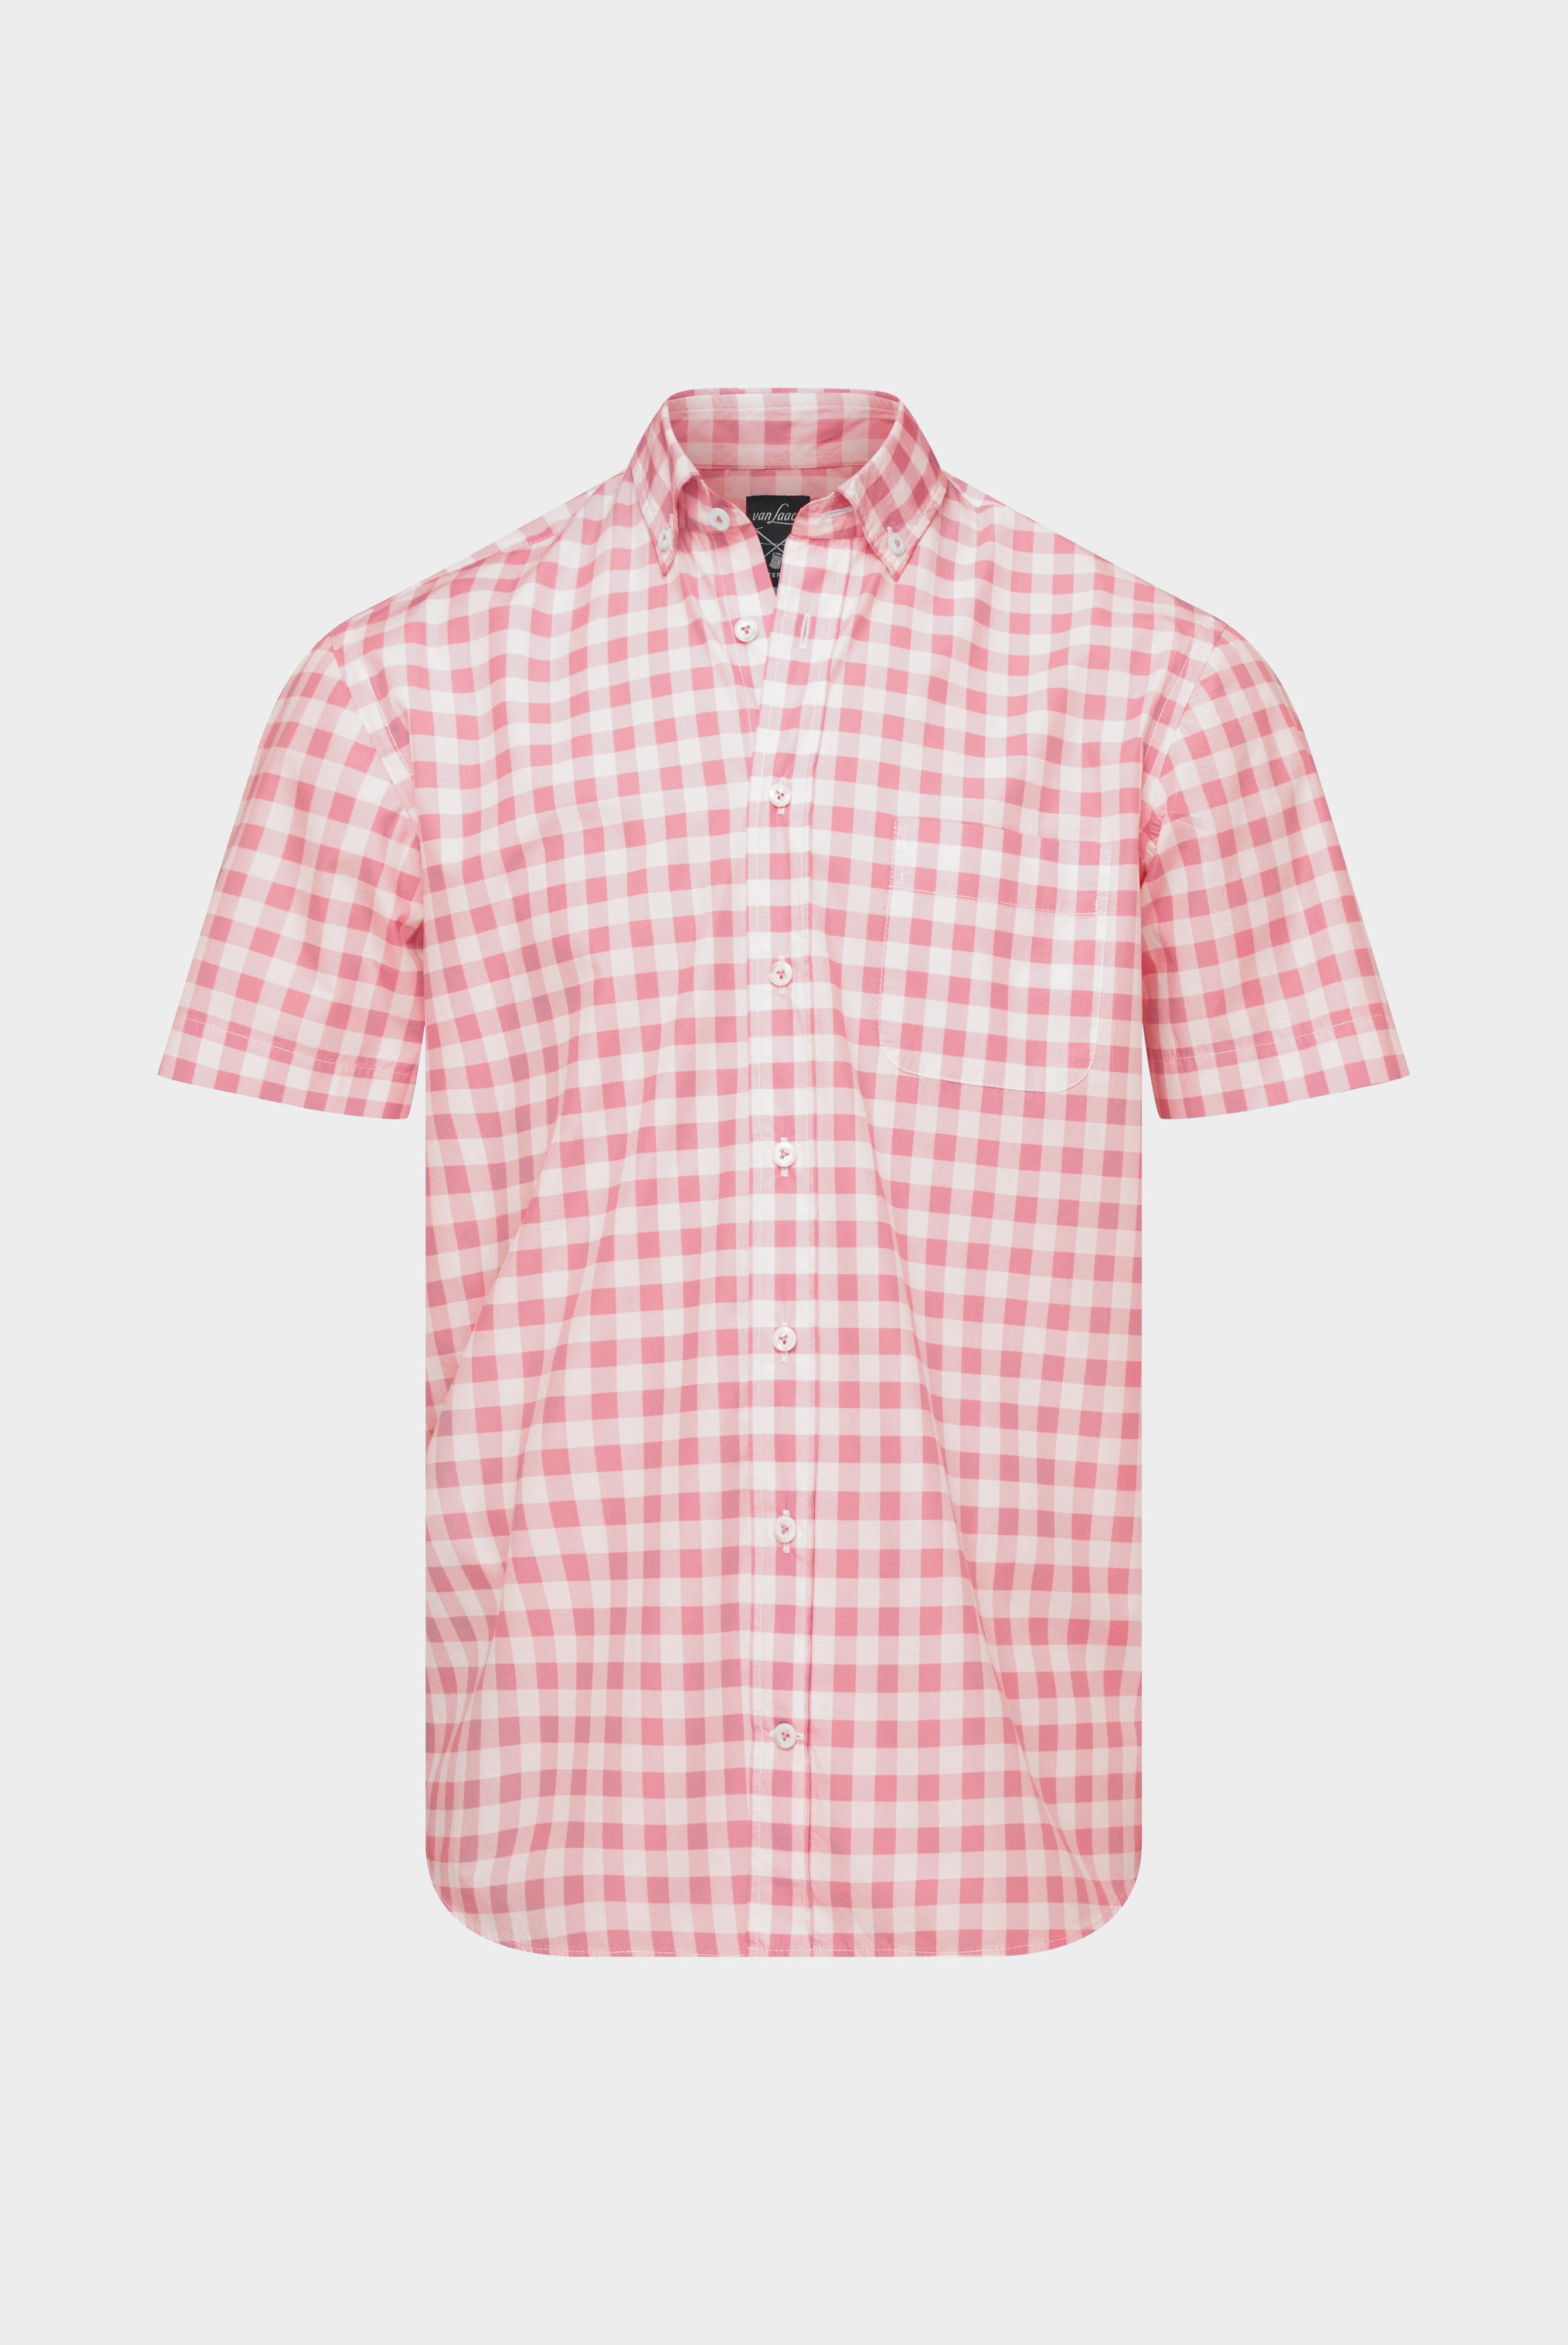 Casual Shirts+Checked poplin short-sleeved shirt with button-down collar+20.2053.Q2.170391.530.38